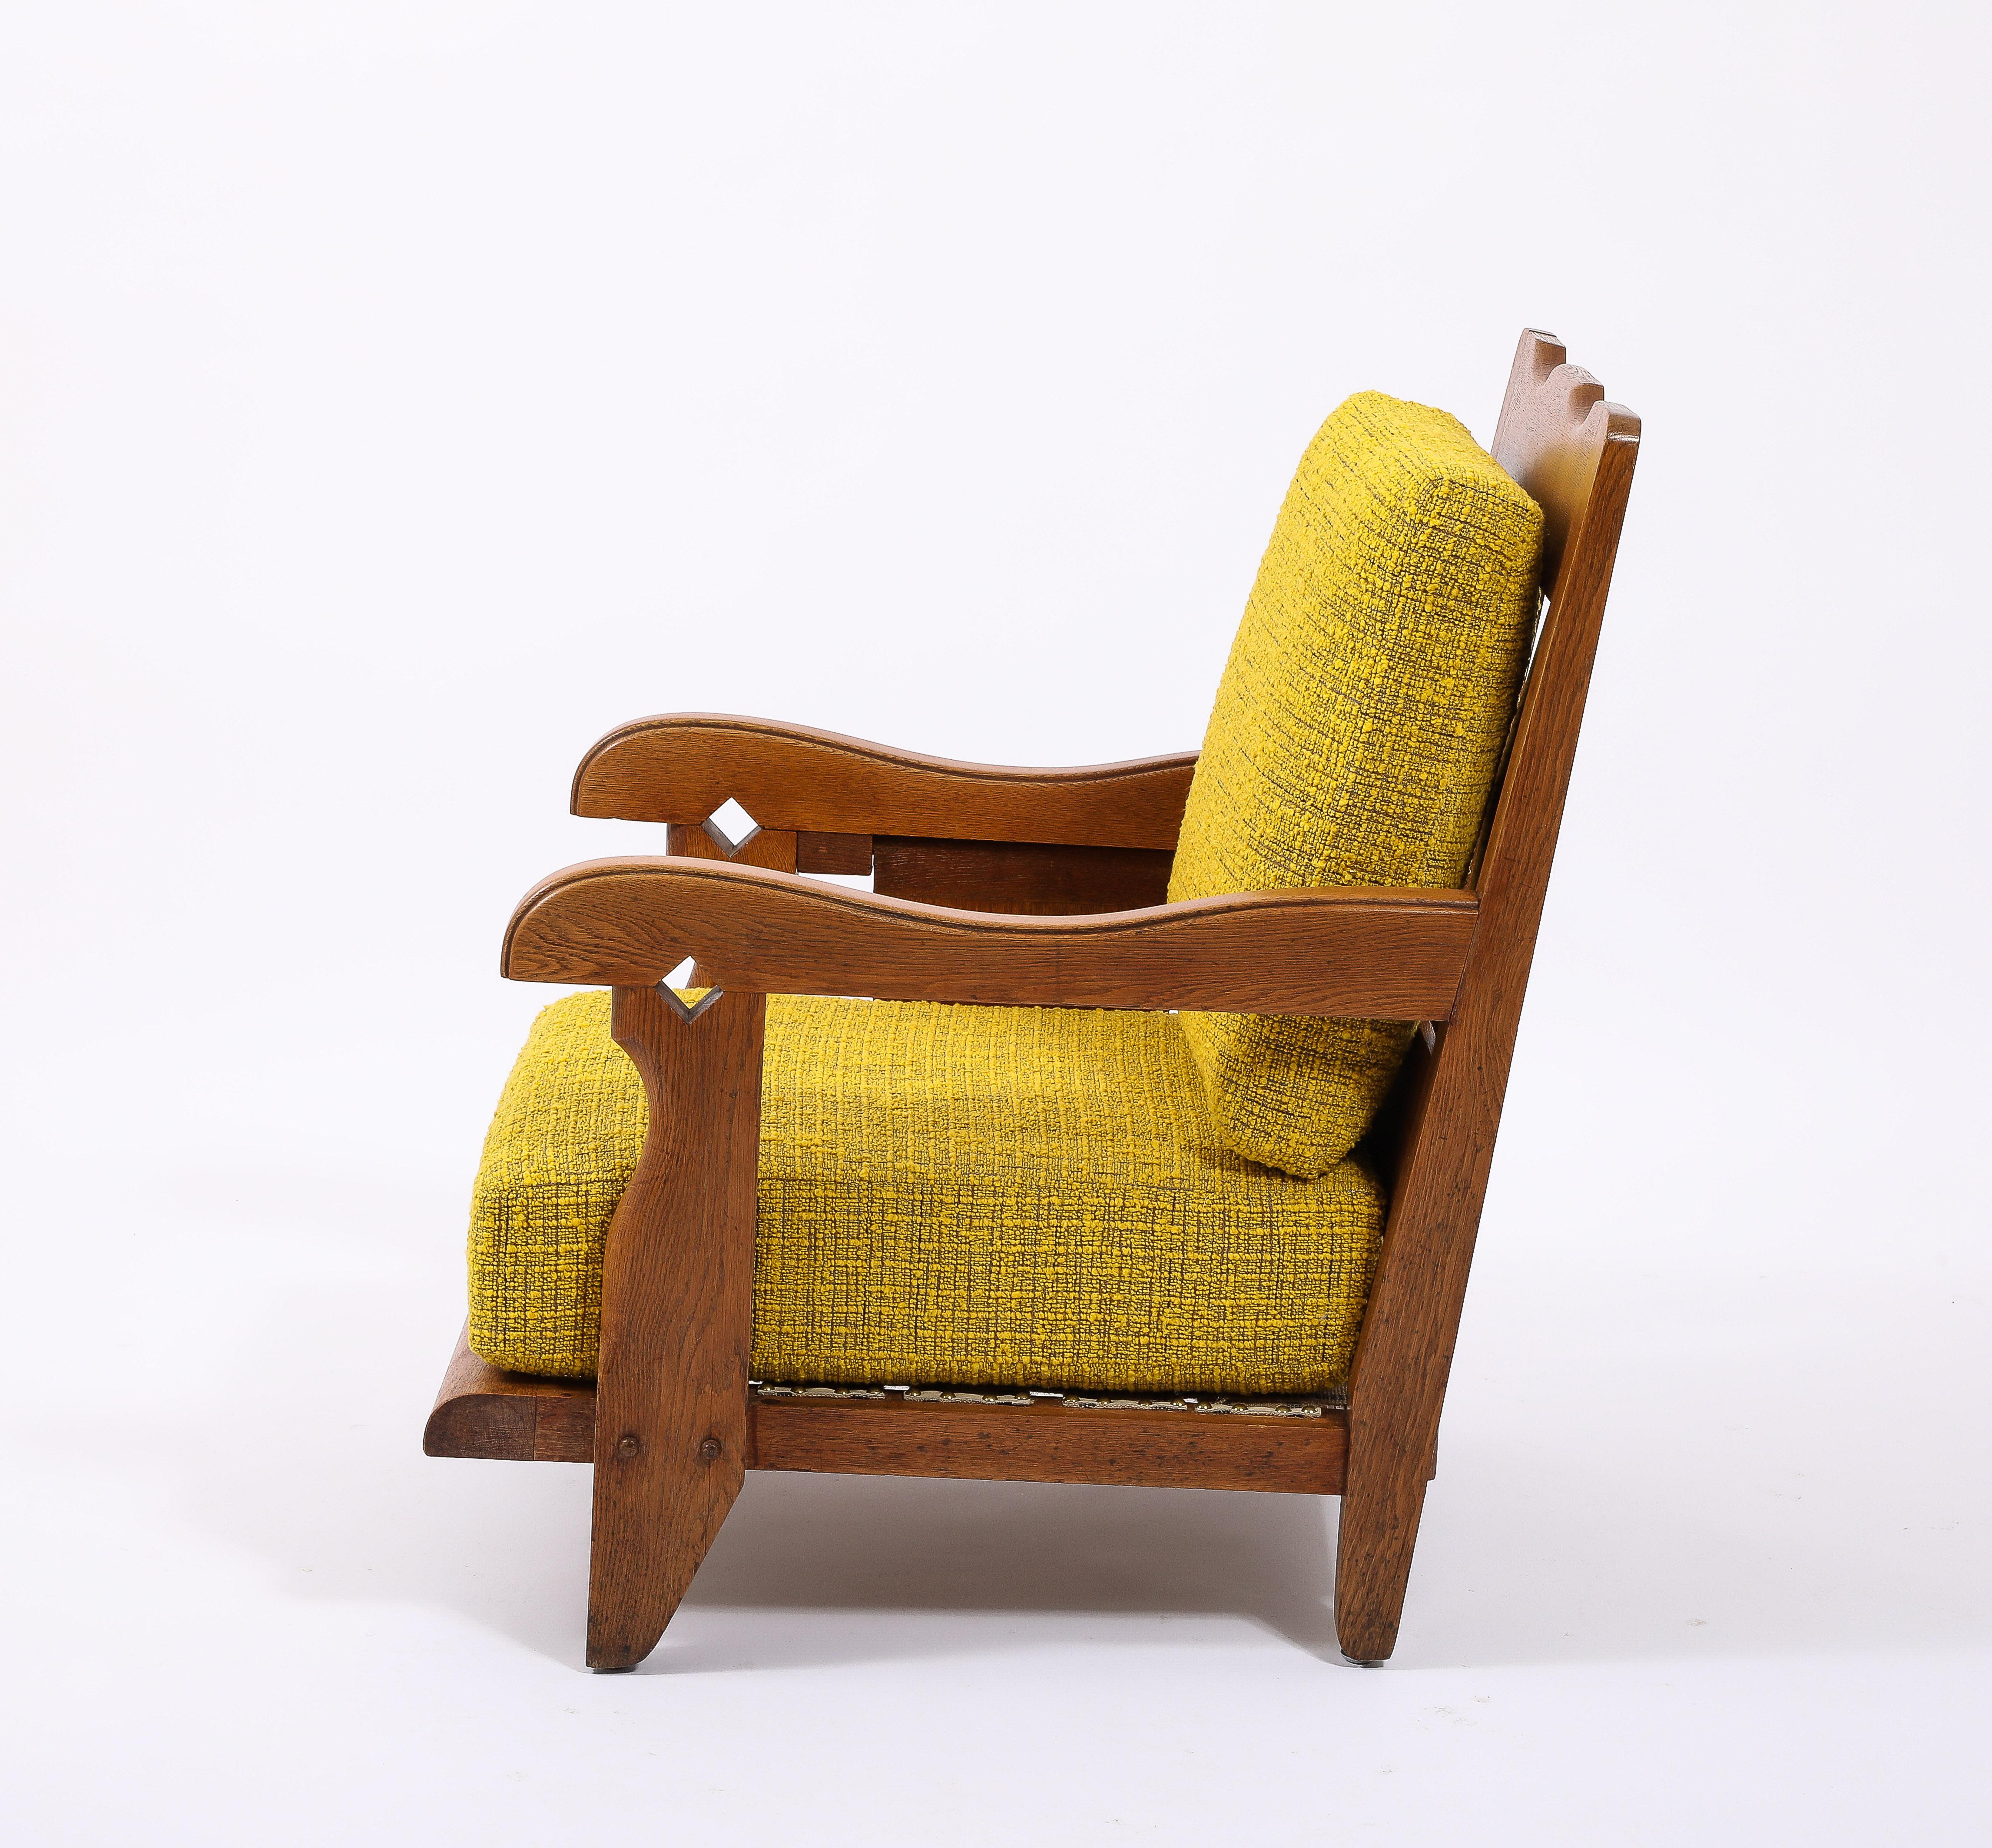 Large Oak & Yellow Wool Armchair with side Shelf, France 1950's For Sale 1